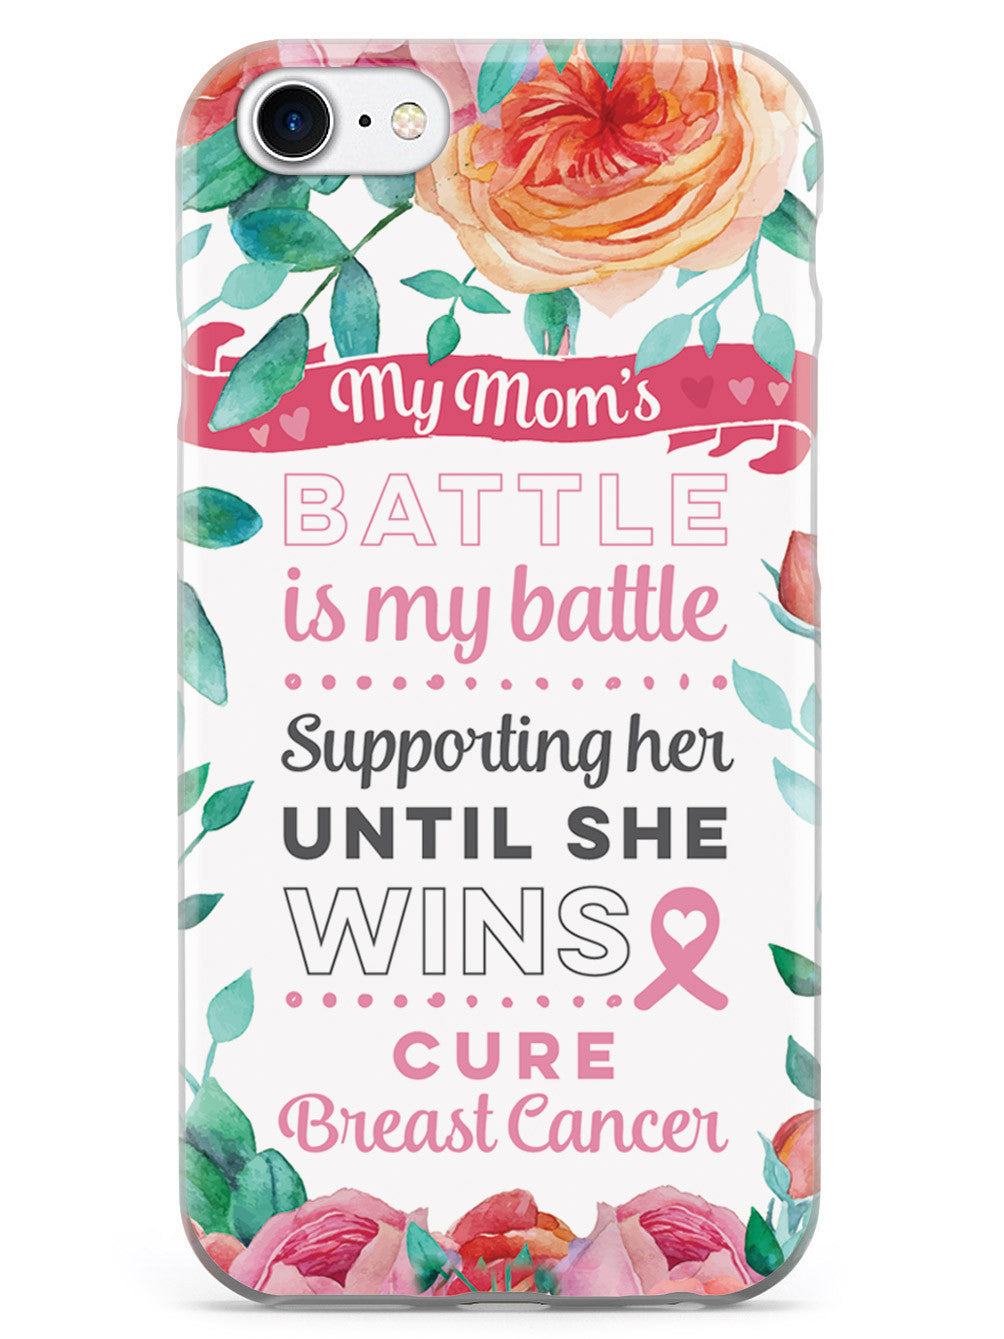 My Mom's Battle - Breast Cancer Awareness Case